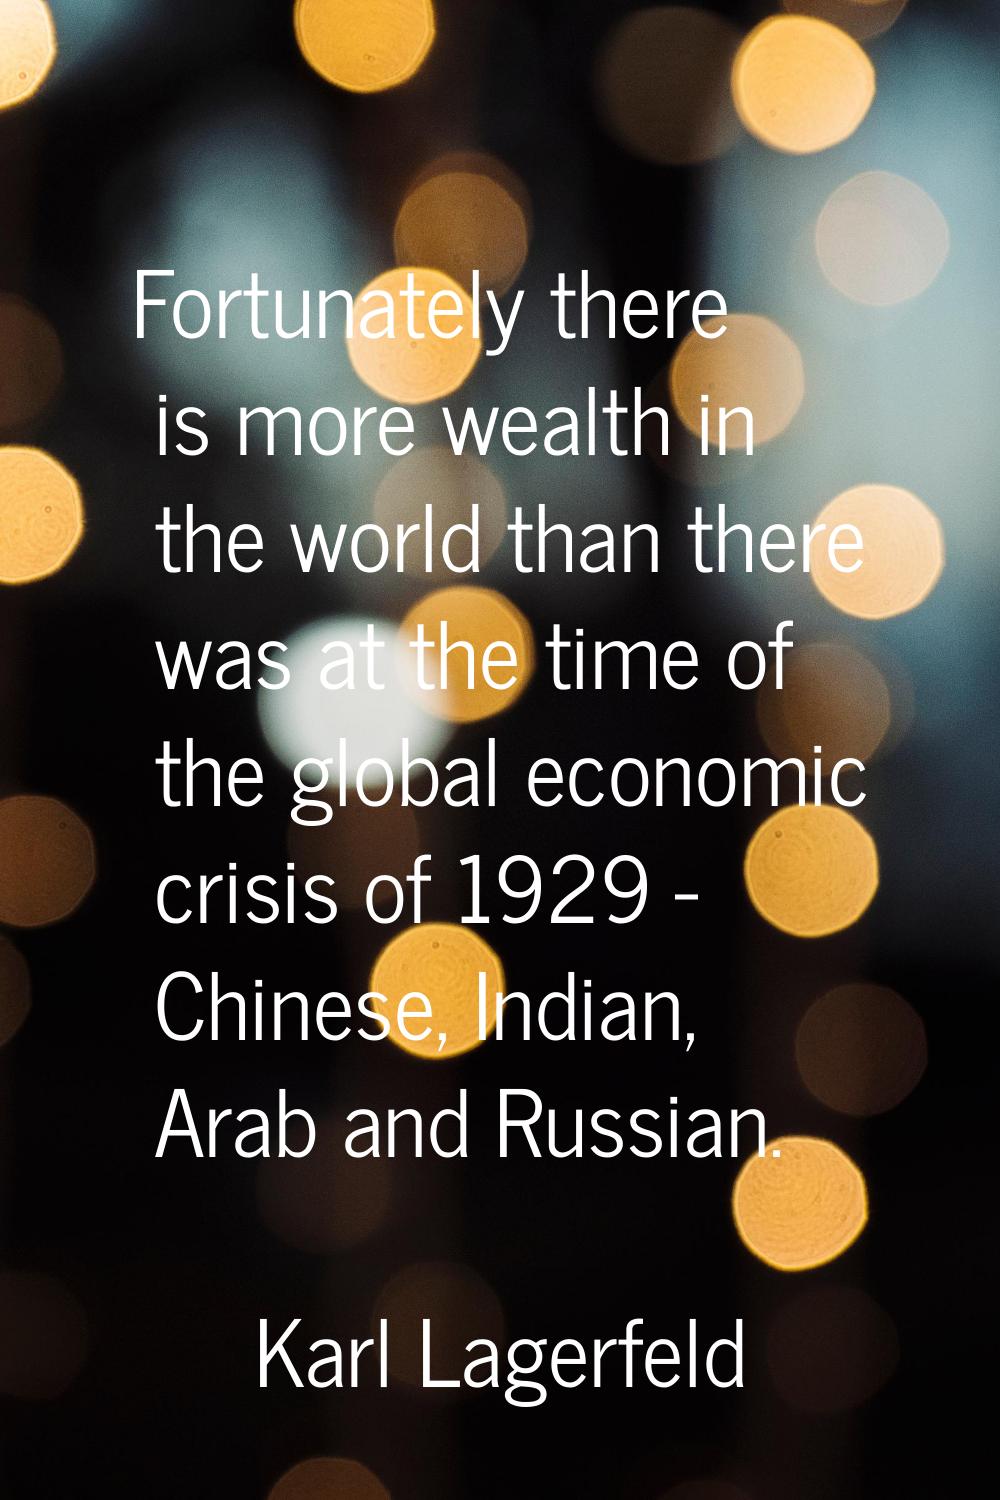 Fortunately there is more wealth in the world than there was at the time of the global economic cri